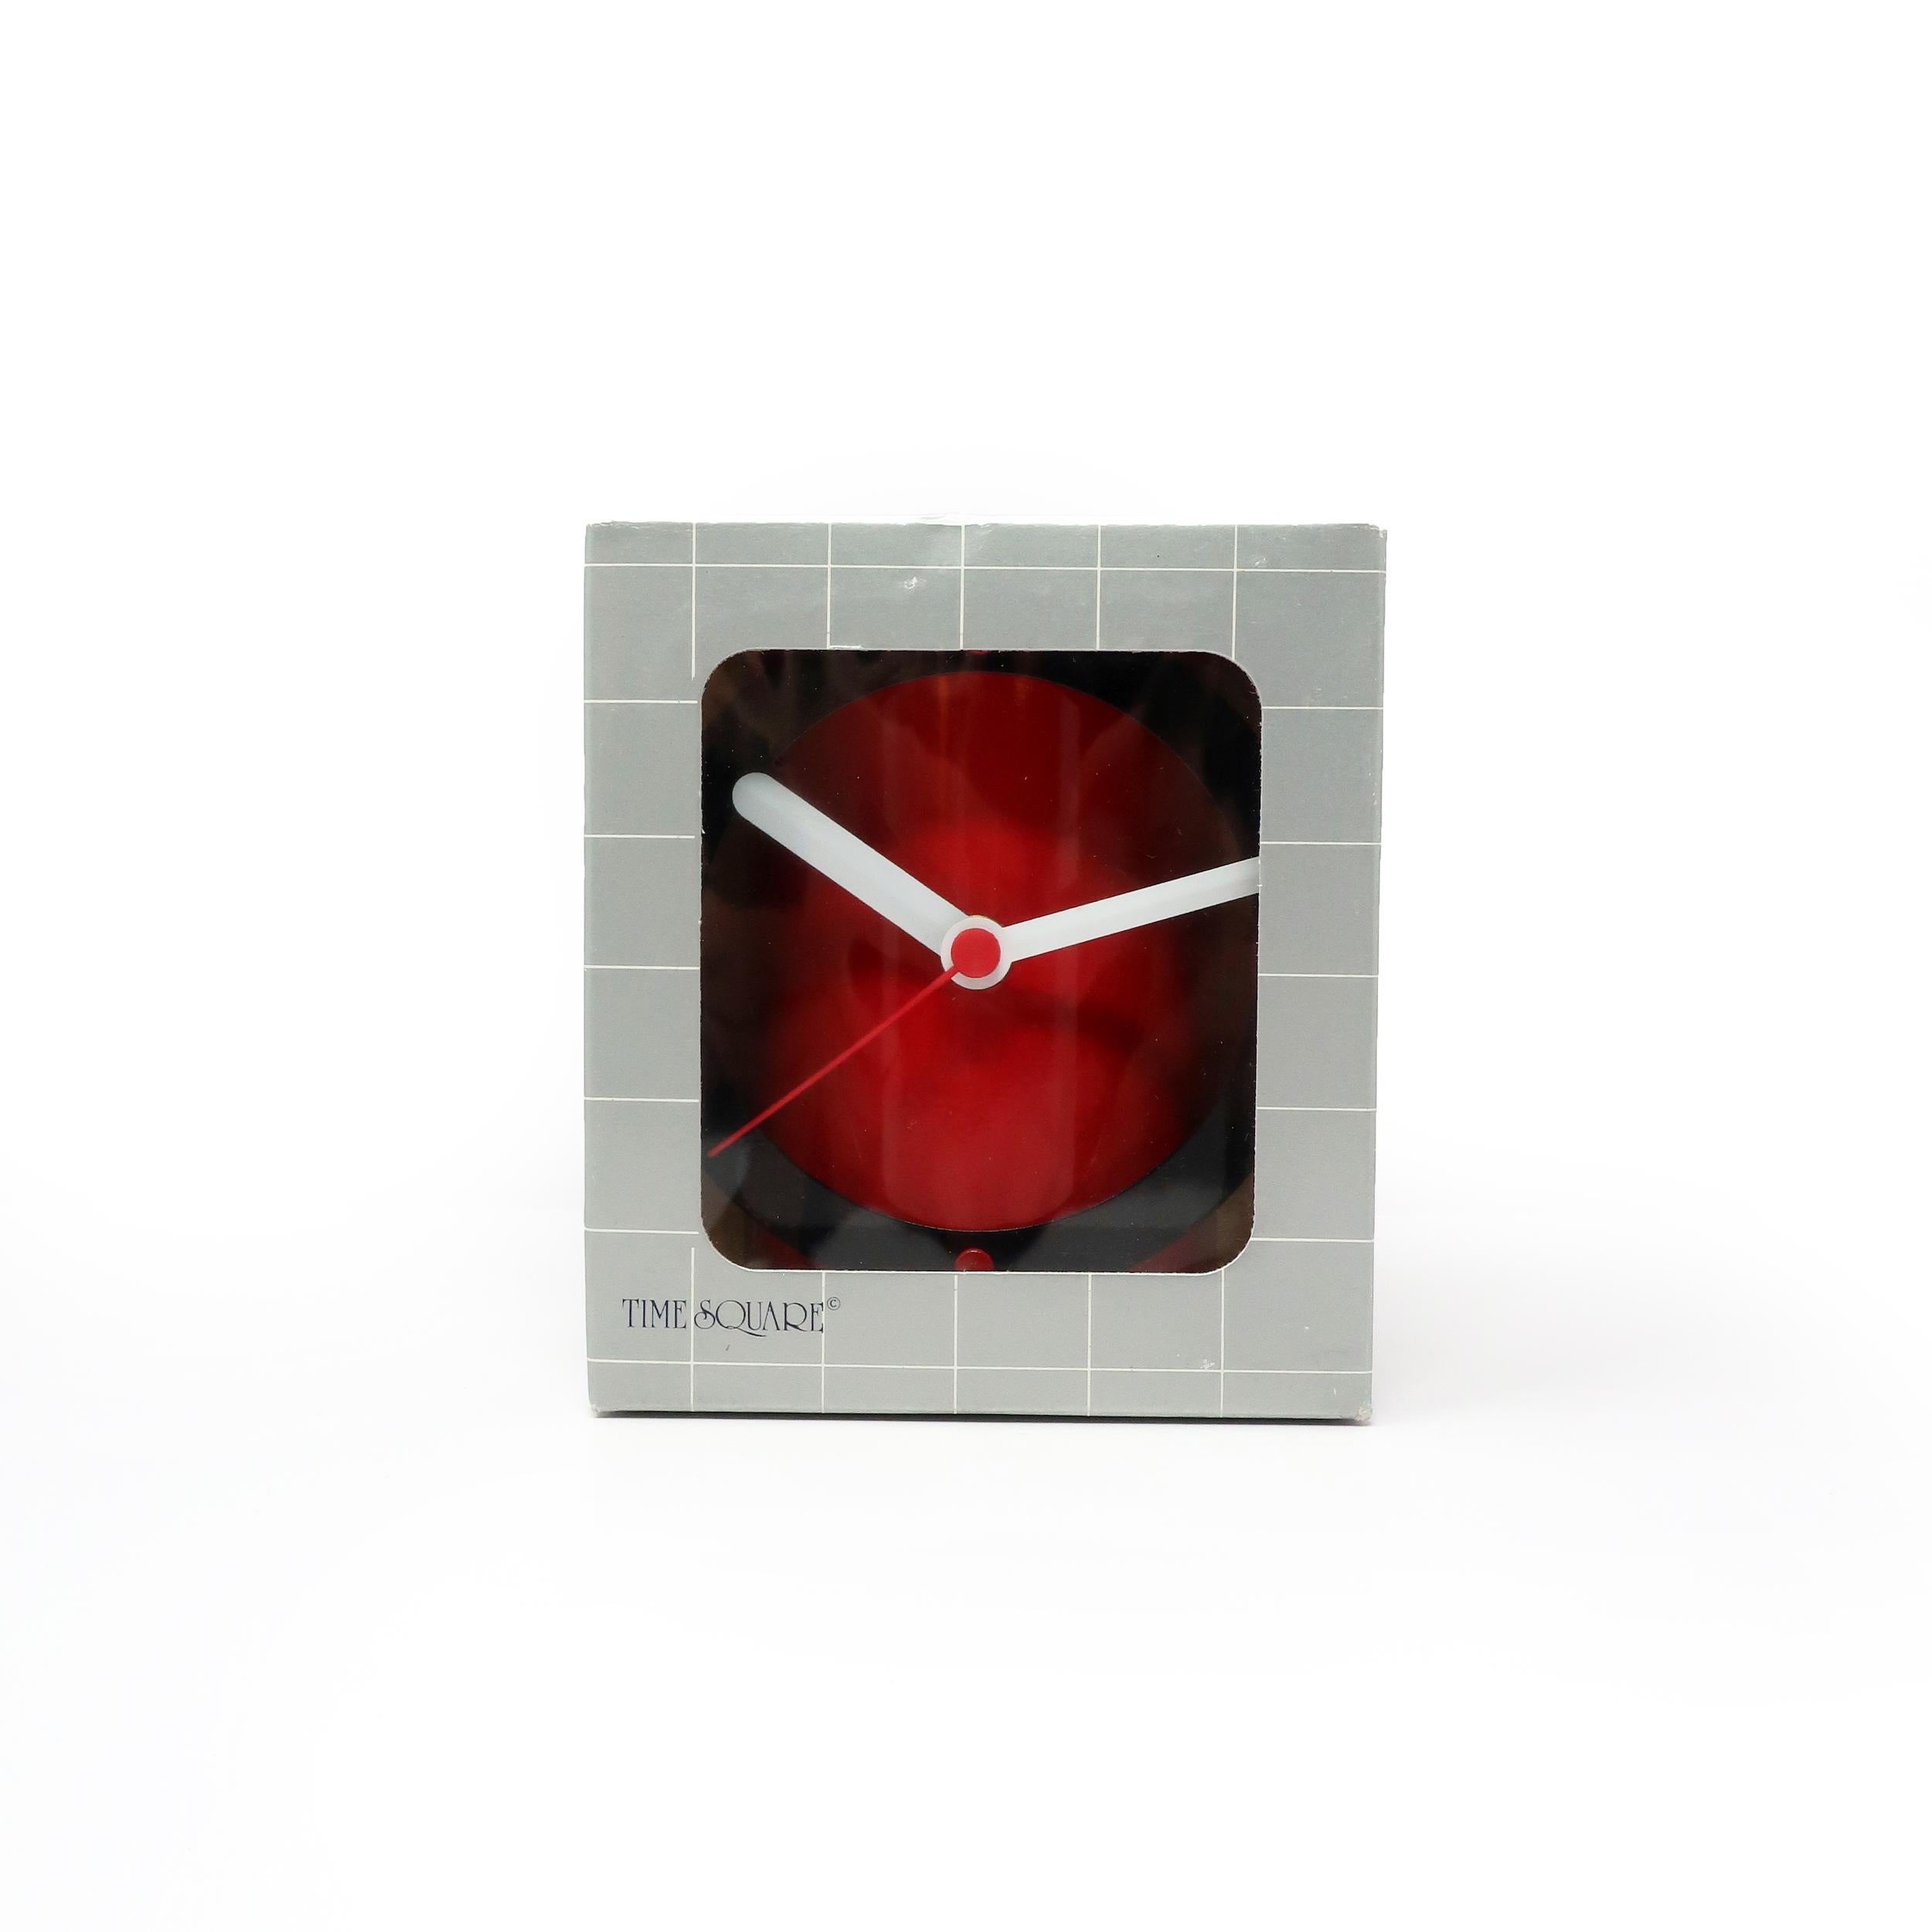 1980s Red & Black Metal Clock by Time Square In Good Condition For Sale In Brooklyn, NY